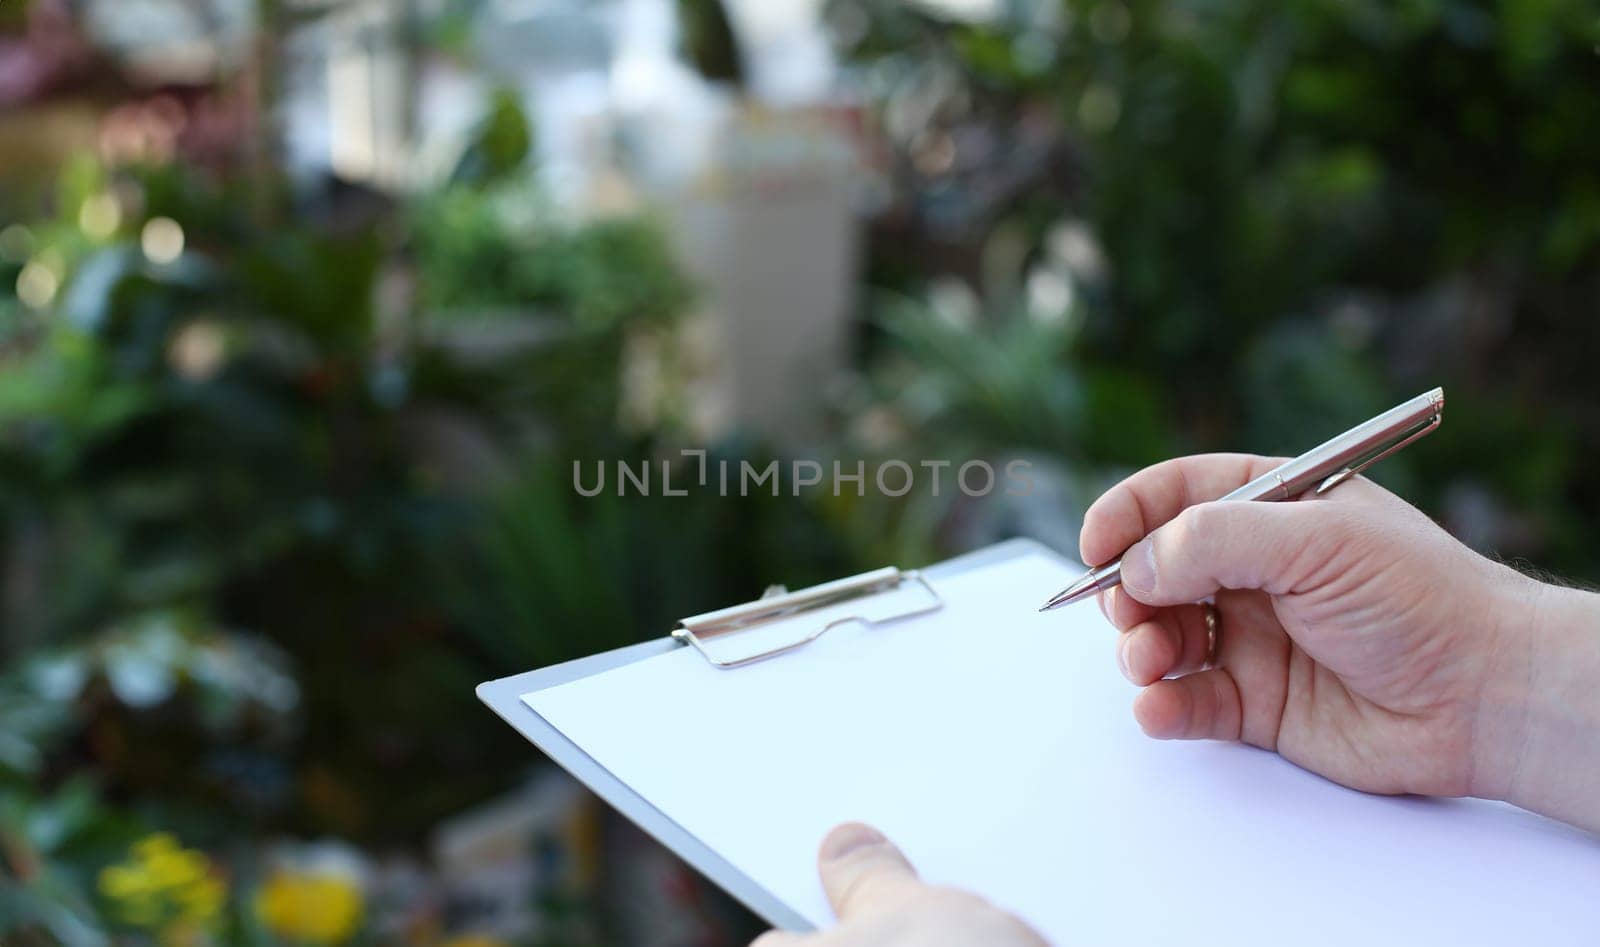 Human Hand Writing on Clipboard with White Paper. Man Holding Pen and Blank Document Close-up Photography. Business Paperwork for Making Notes. Male Person Sign Document Page Partial View Photo